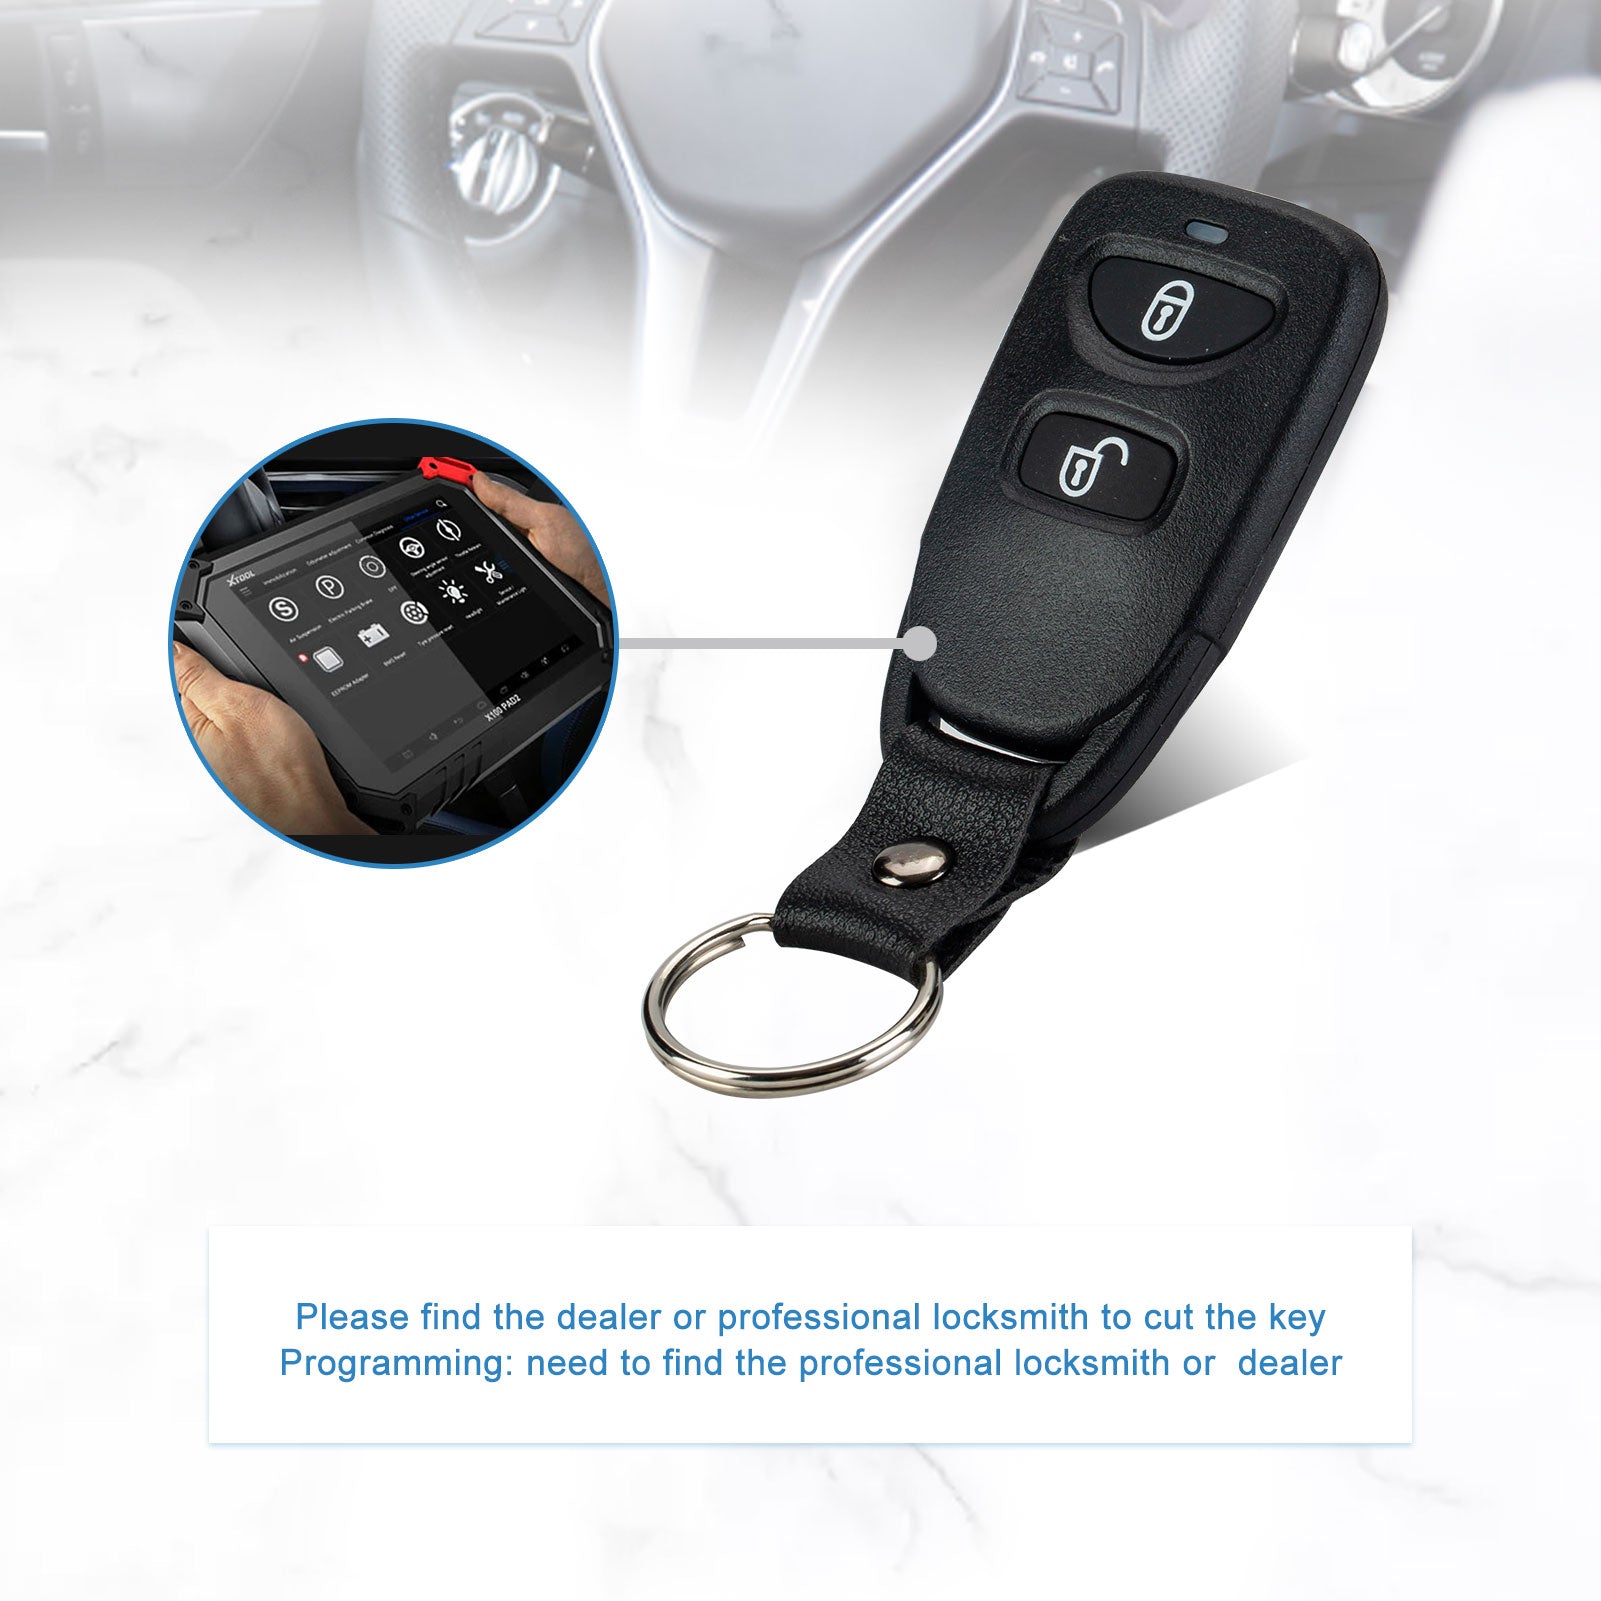 Replacement for Keyless Entry Remote fit for KIA 2009-2011, Rio 2009-2013 Sorento PINHA-T036